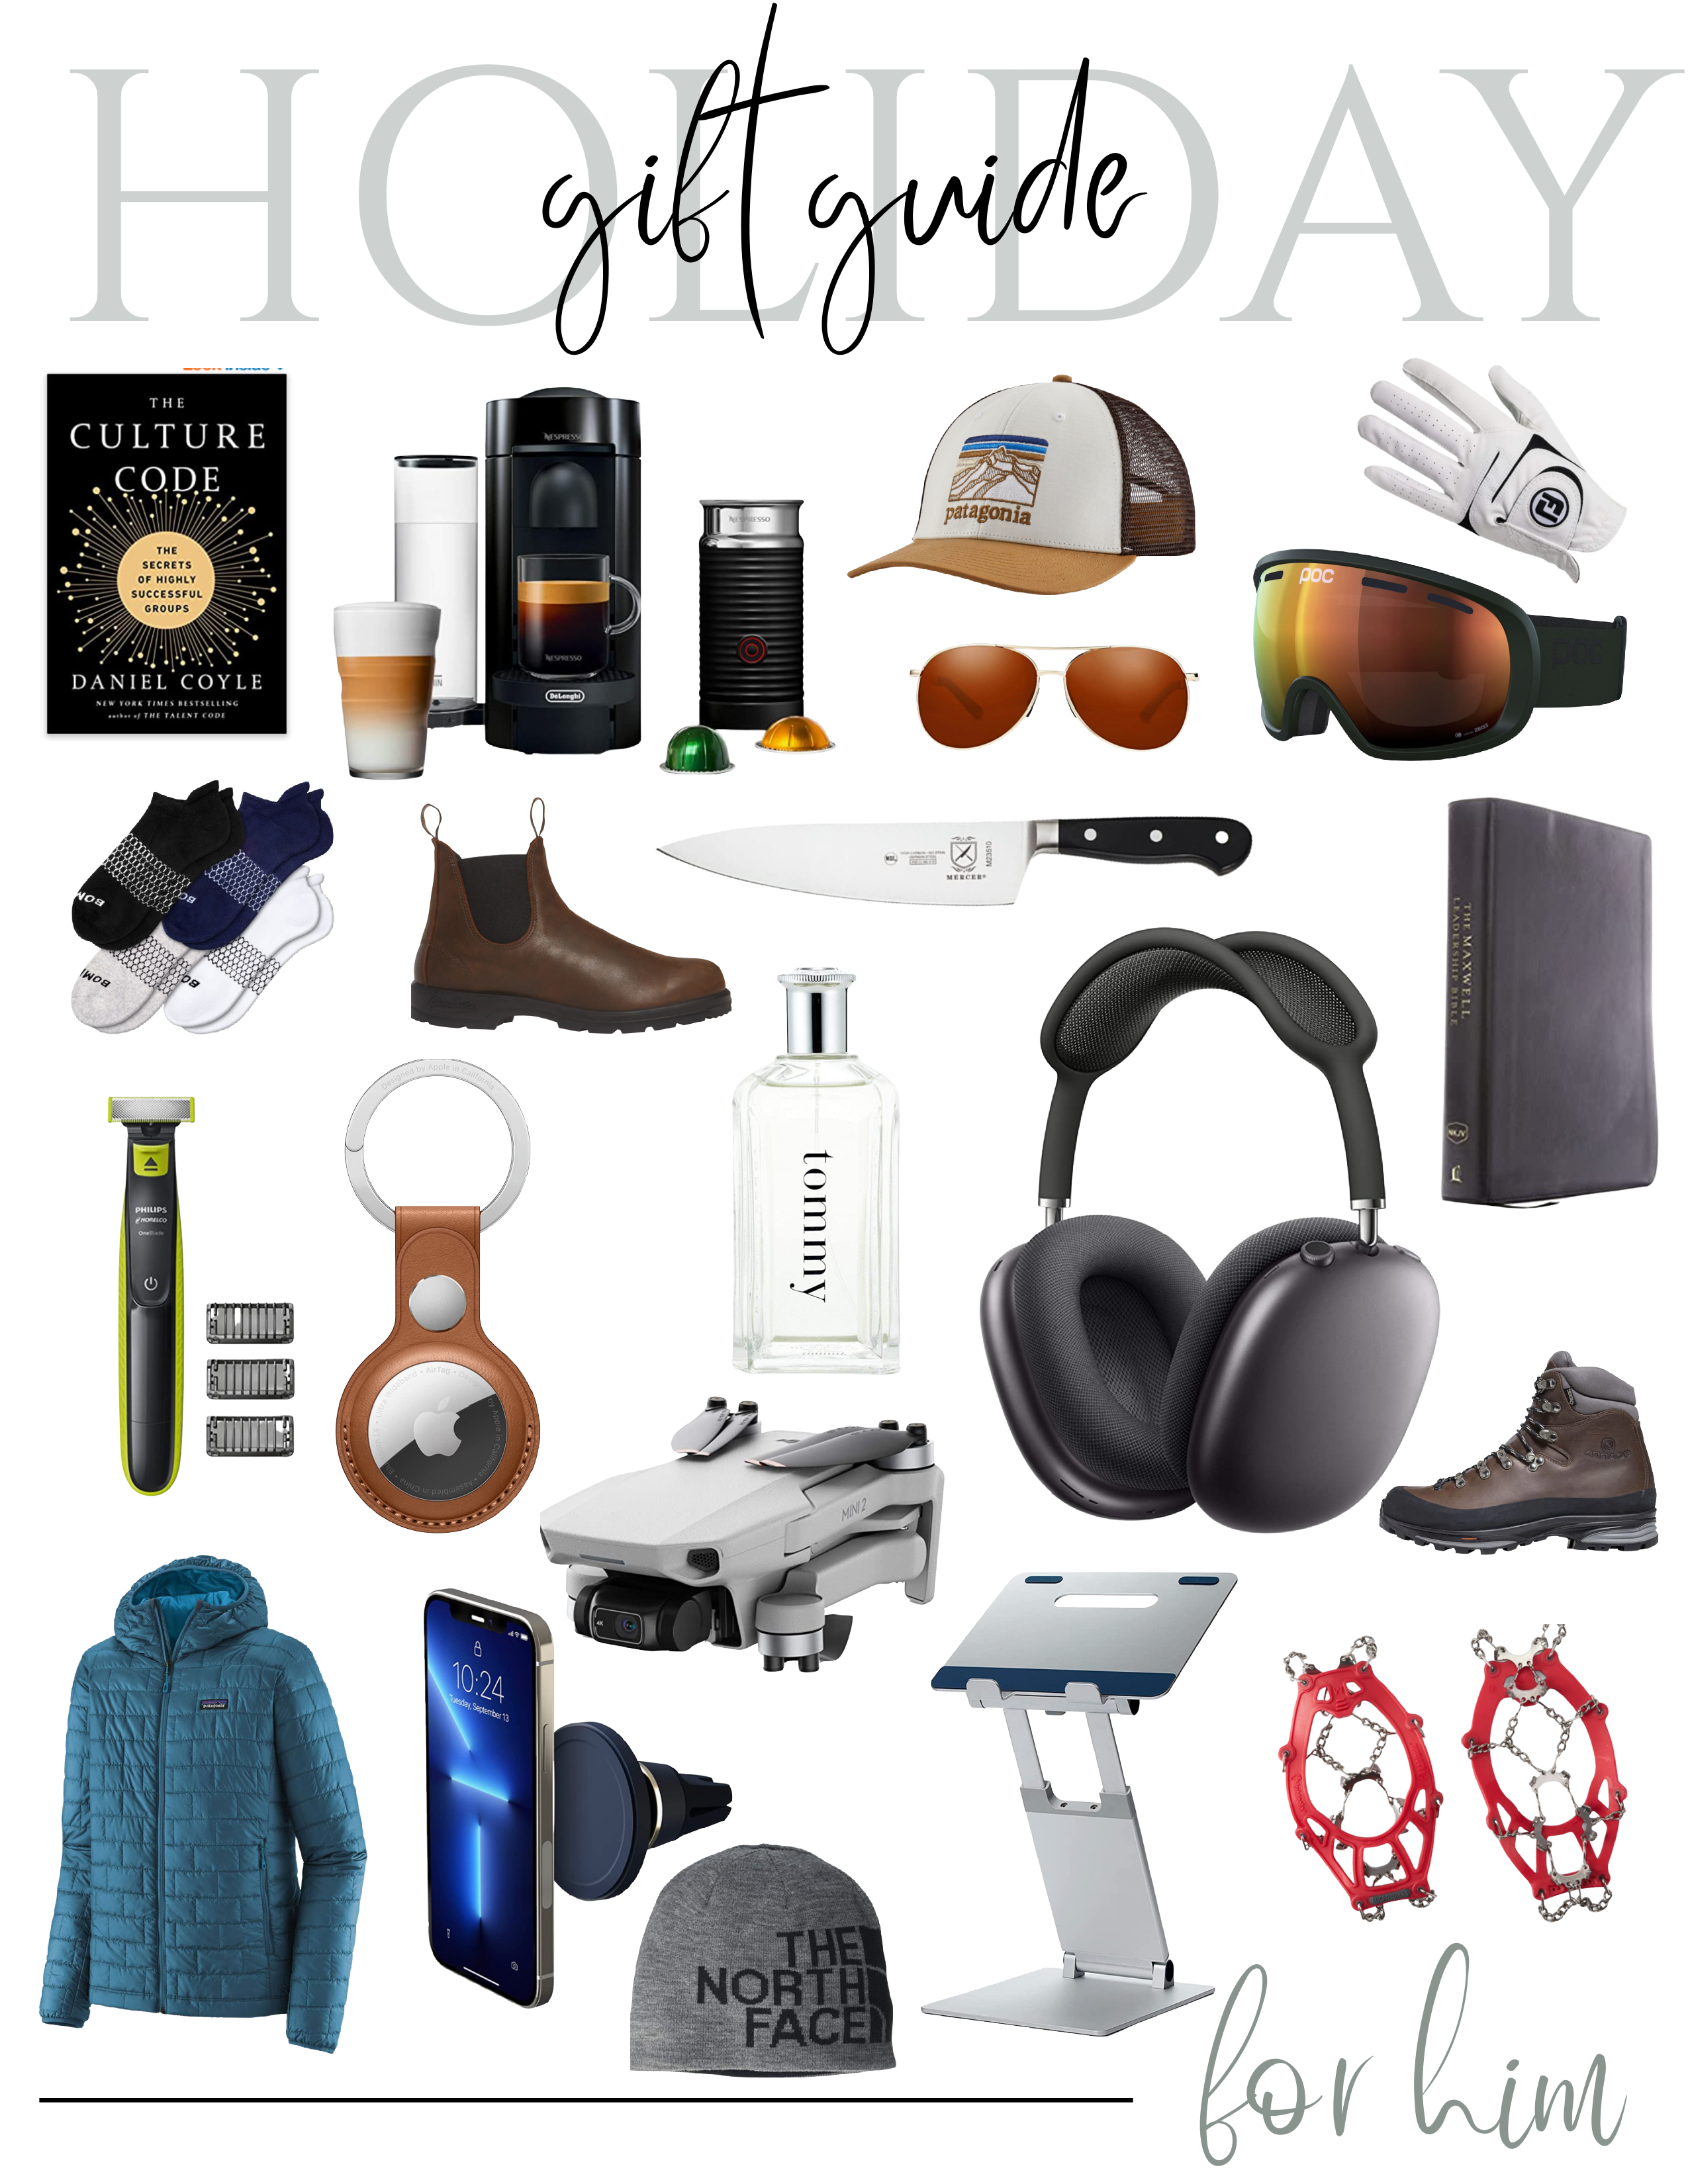 From Classic to Unique: The Best Gift Ideas for Men of All Ages